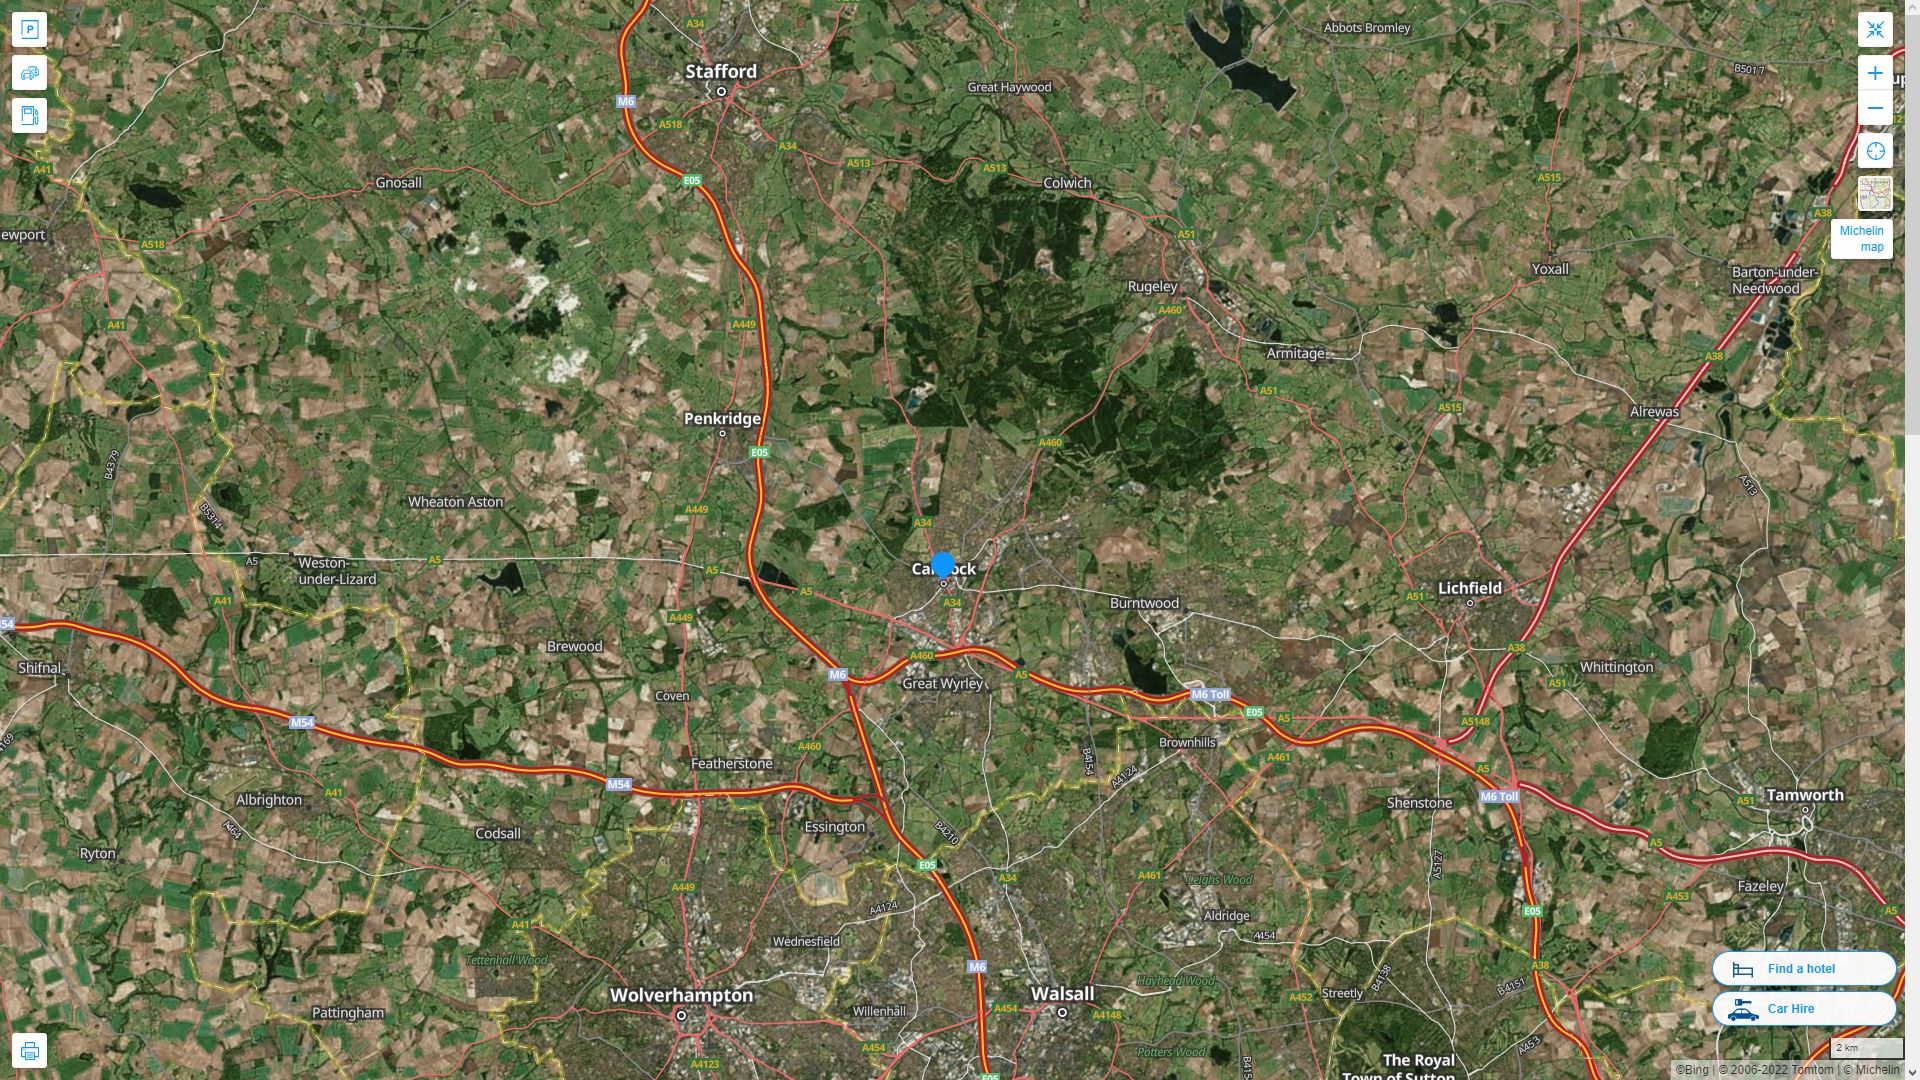 Cannock Highway and Road Map with Satellite View